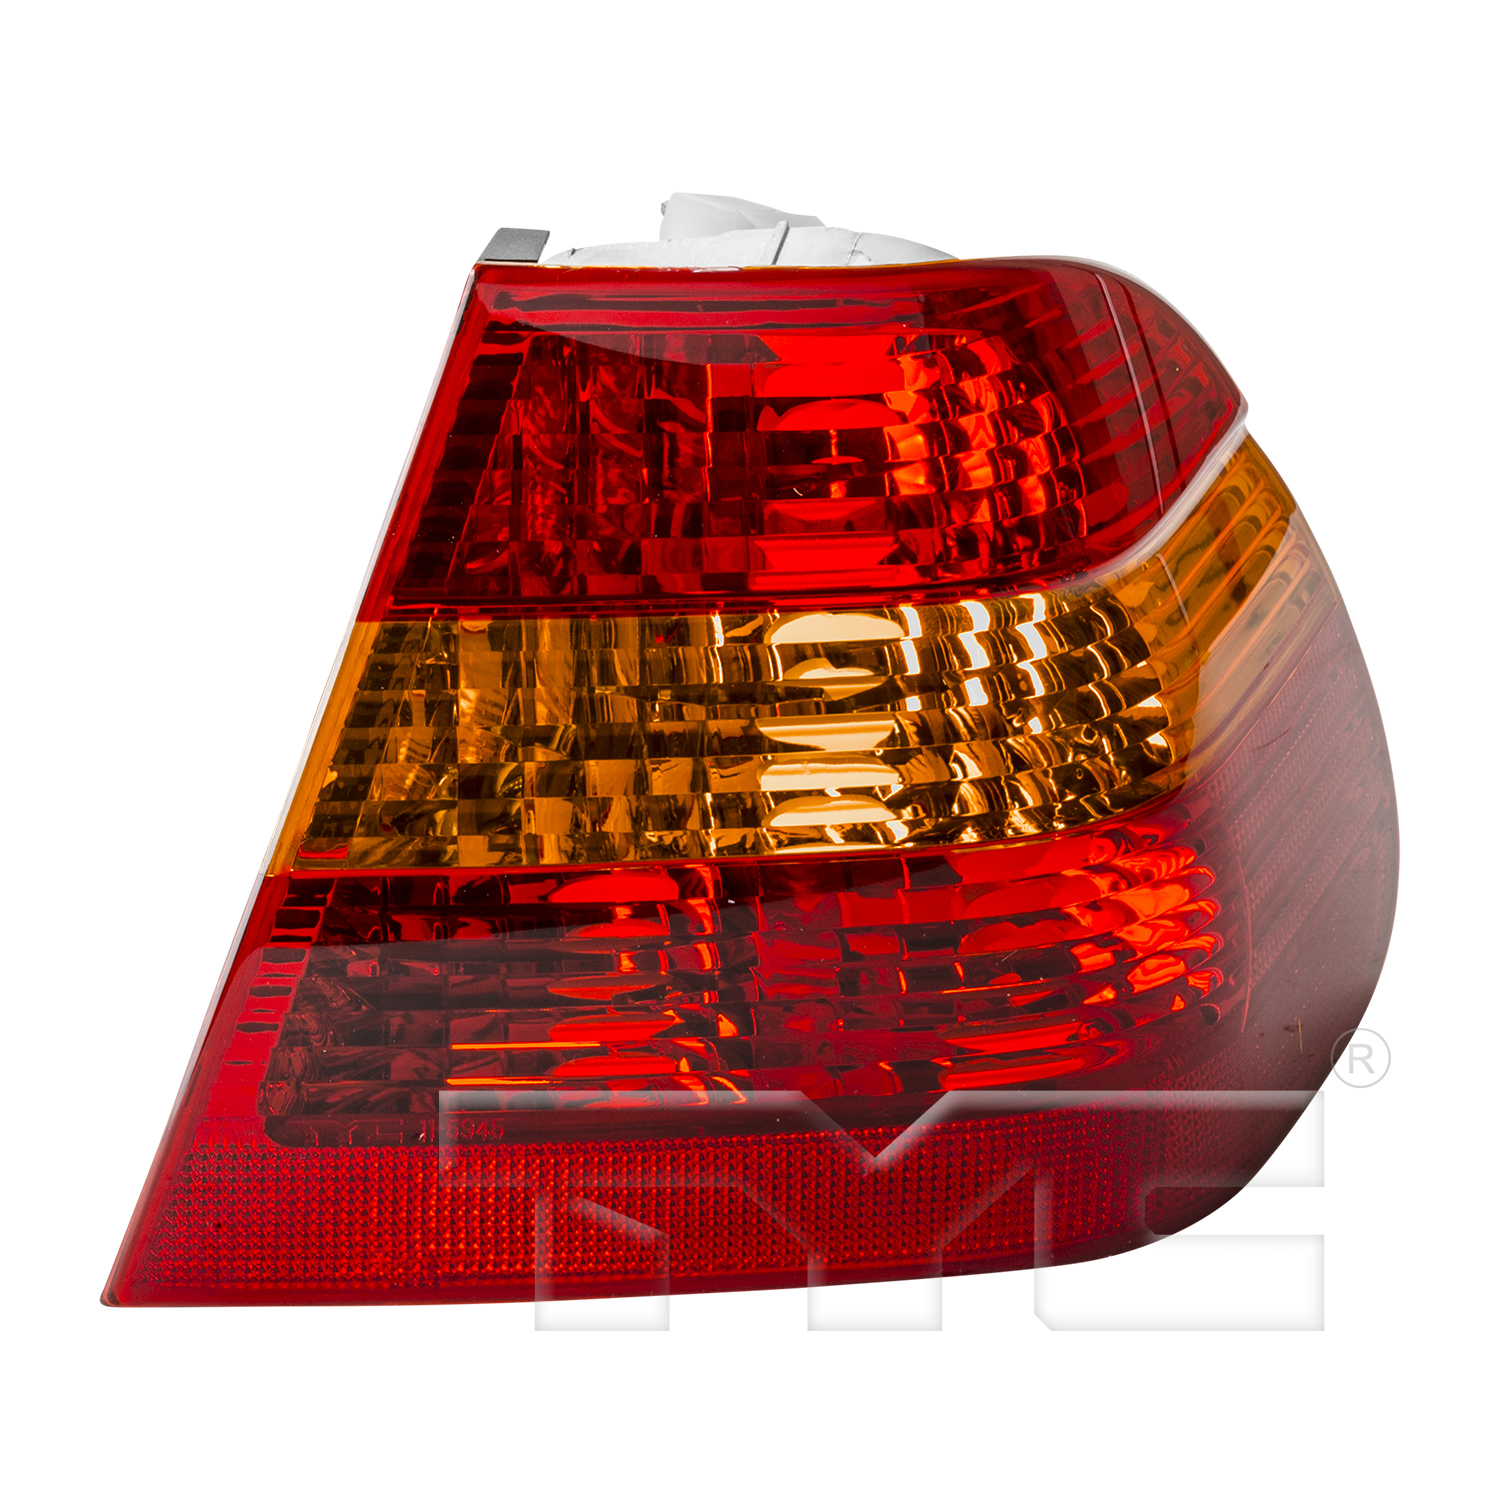 Aftermarket TAILLIGHTS for BMW - 330I, 330i,02-05,RT Taillamp assy